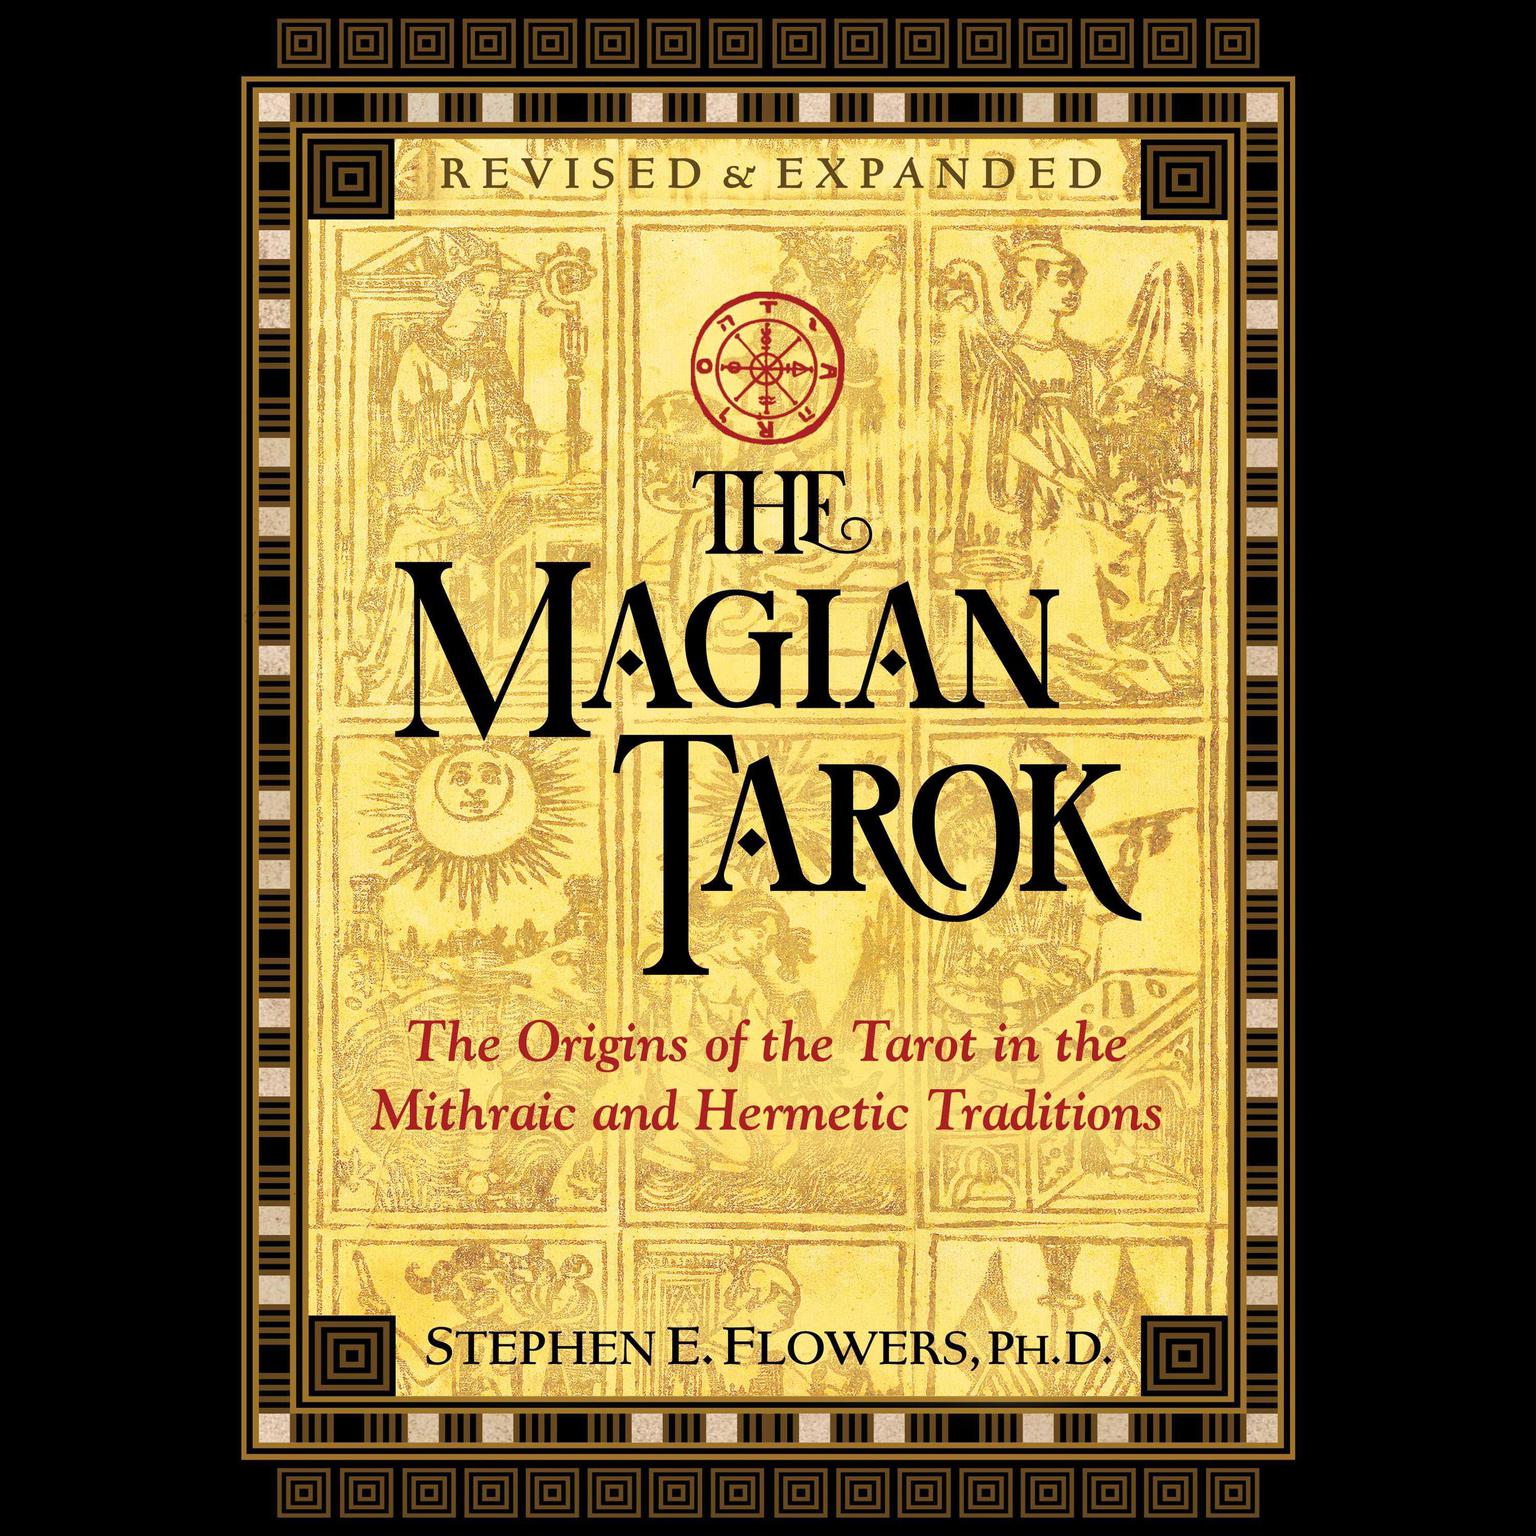 The Magian Tarok: The Origins of the Tarot in the Mithraic and Hermetic Traditions Audiobook, by Stephen E. Flowers